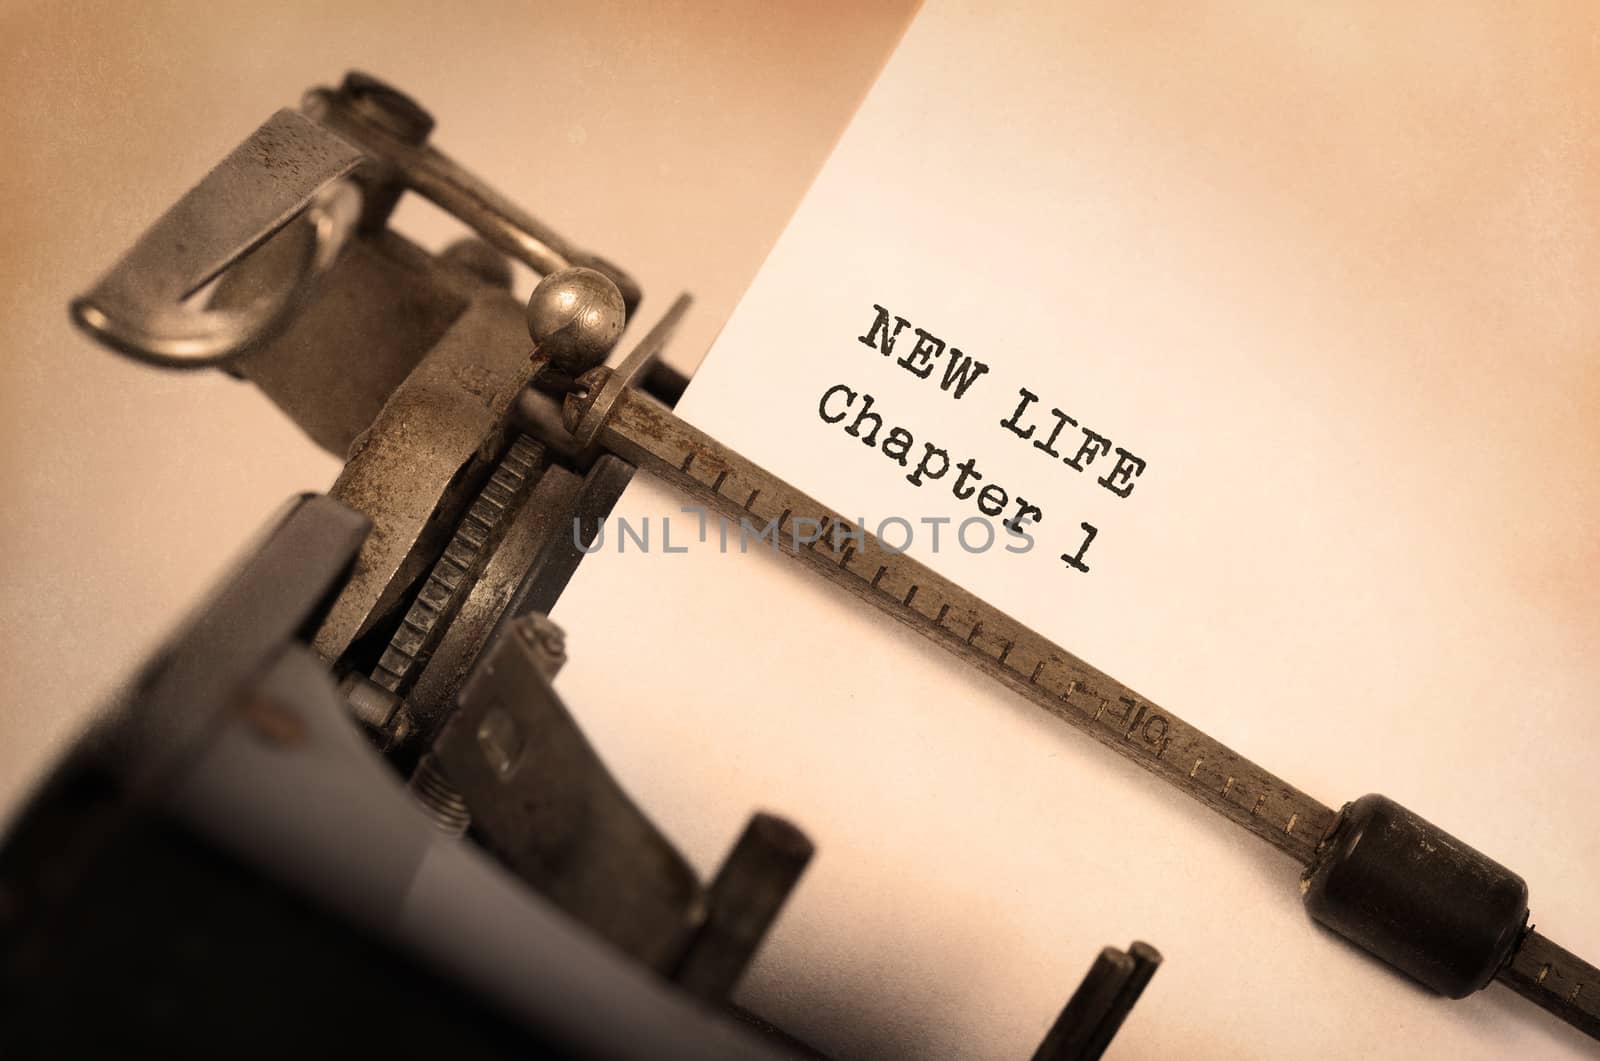 Vintage inscription made by old typewriter, new life, chapter 1